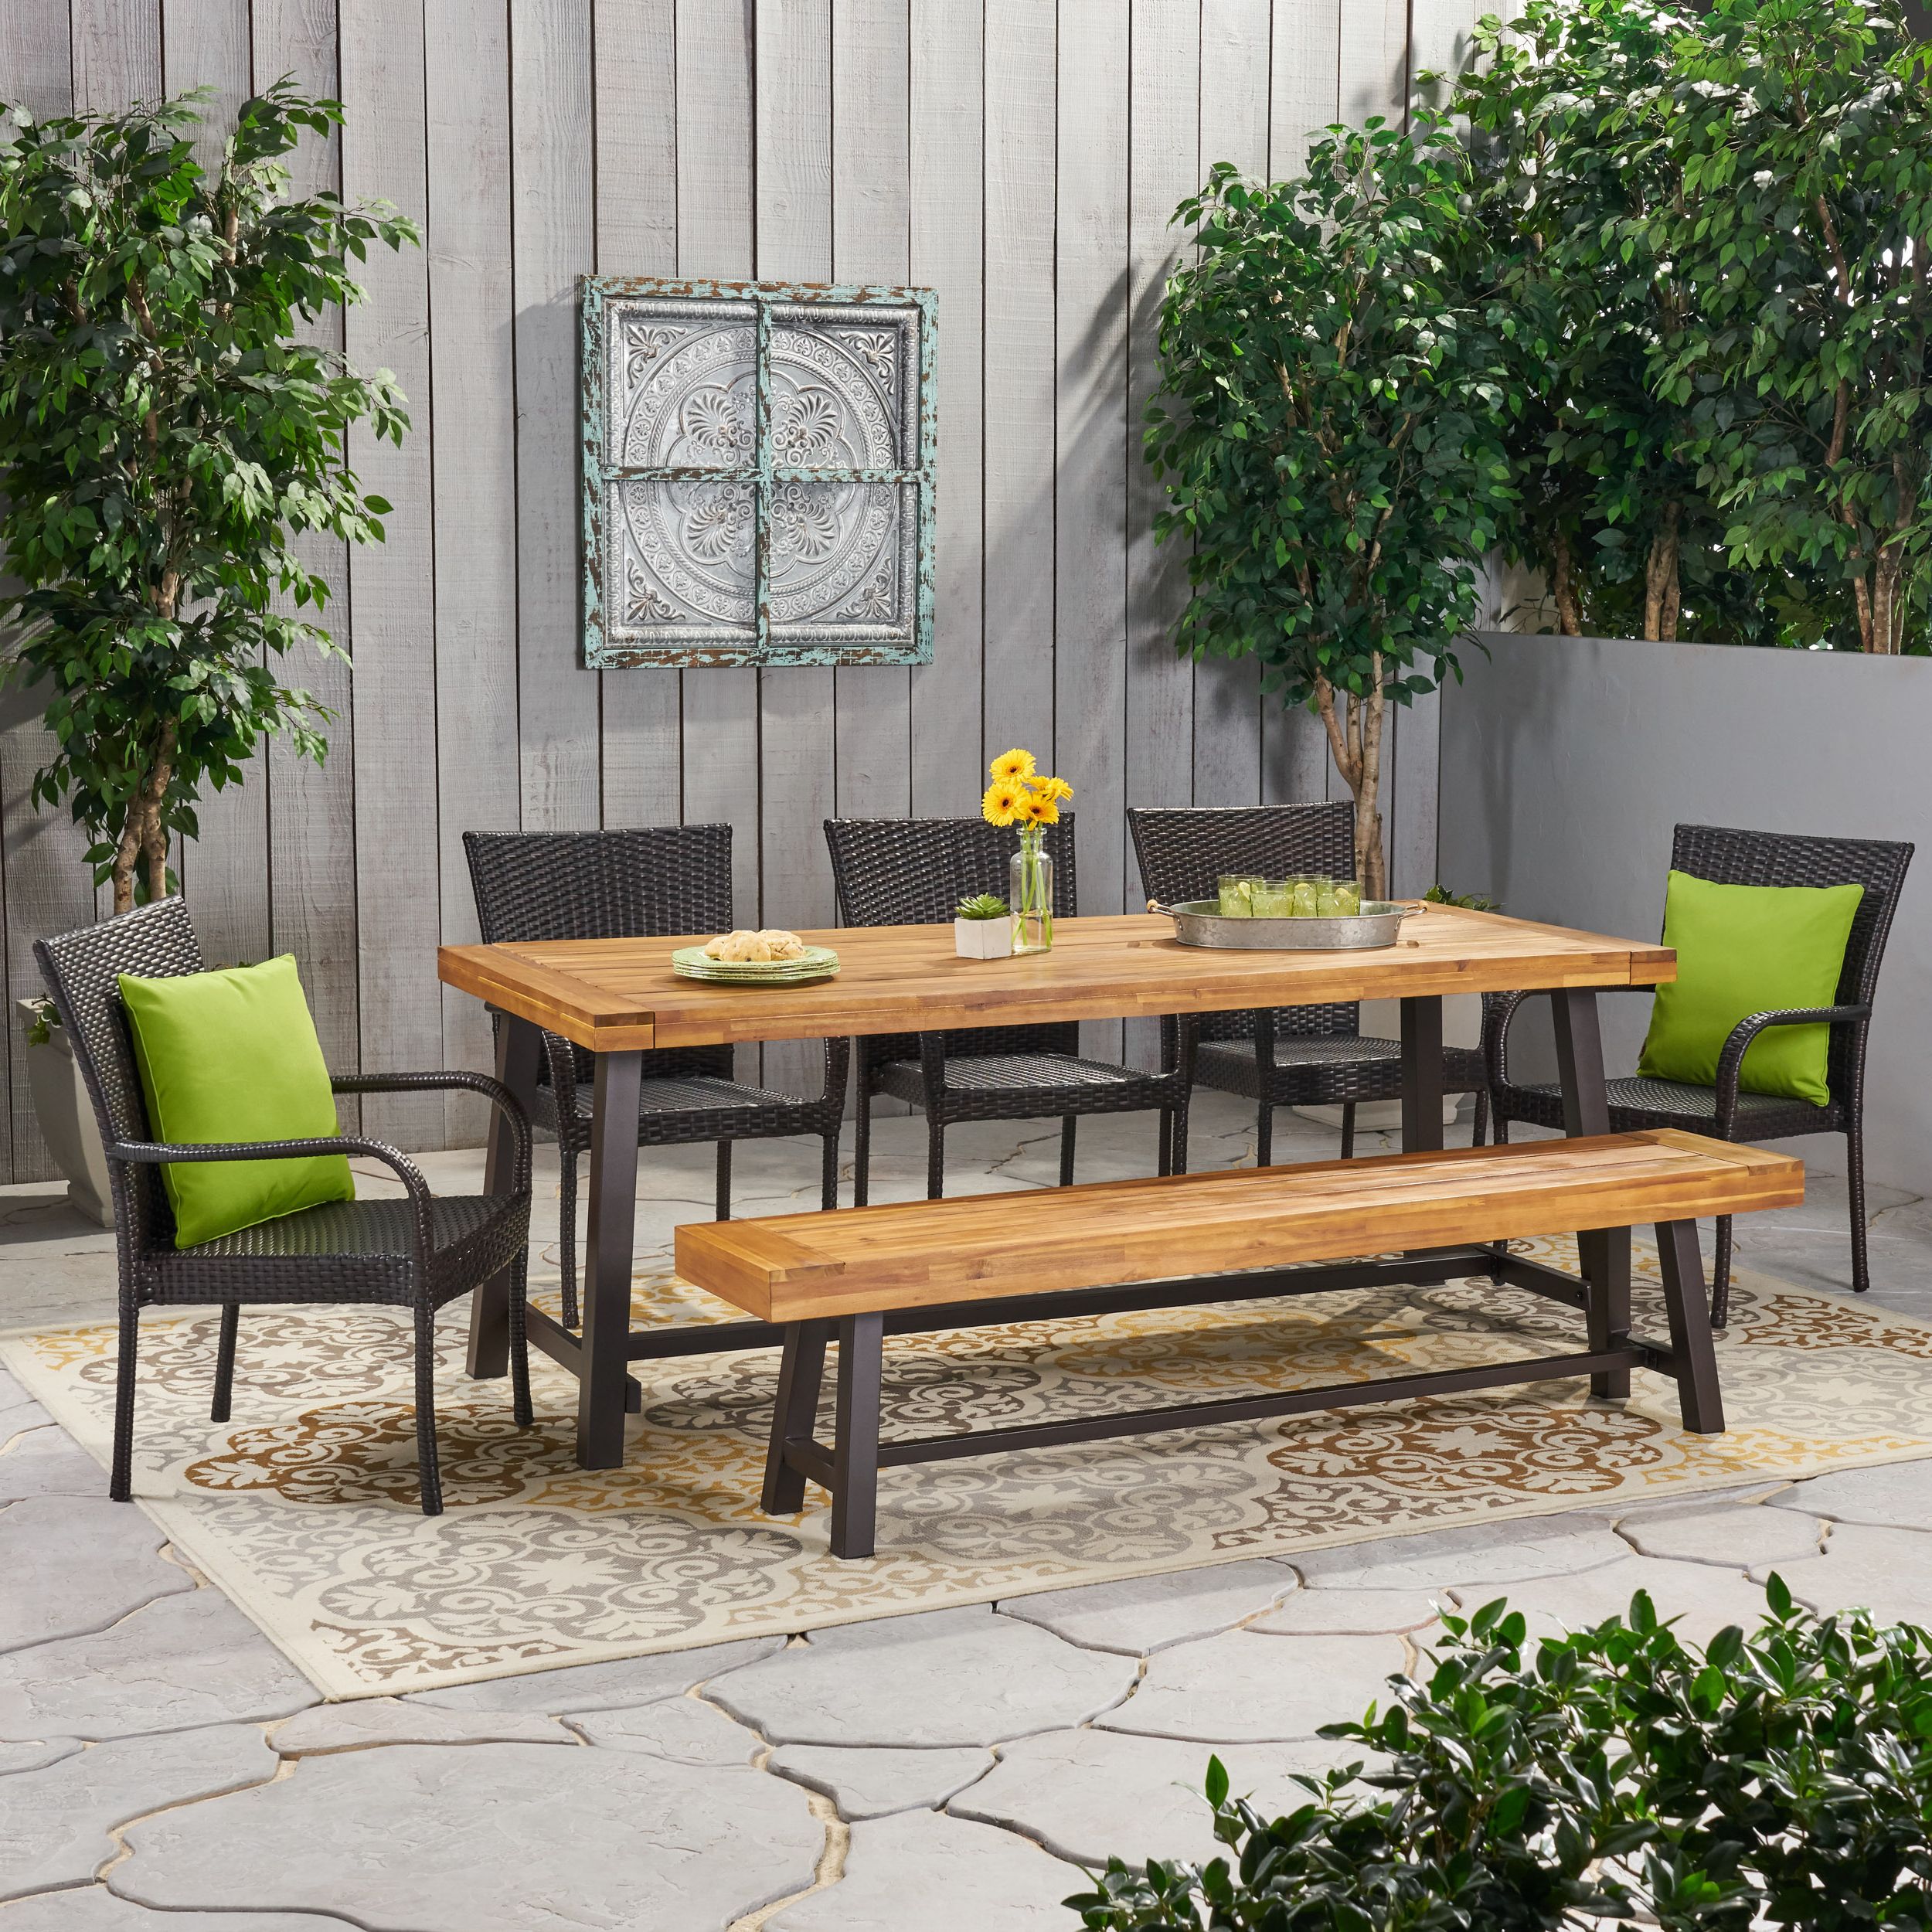 Logan Outdoor Rustic Acacia Wood 8 Seater Dining Set With Dining Bench Pertaining To Latest Acacia Wood Outdoor Seating Patio Sets (View 9 of 15)